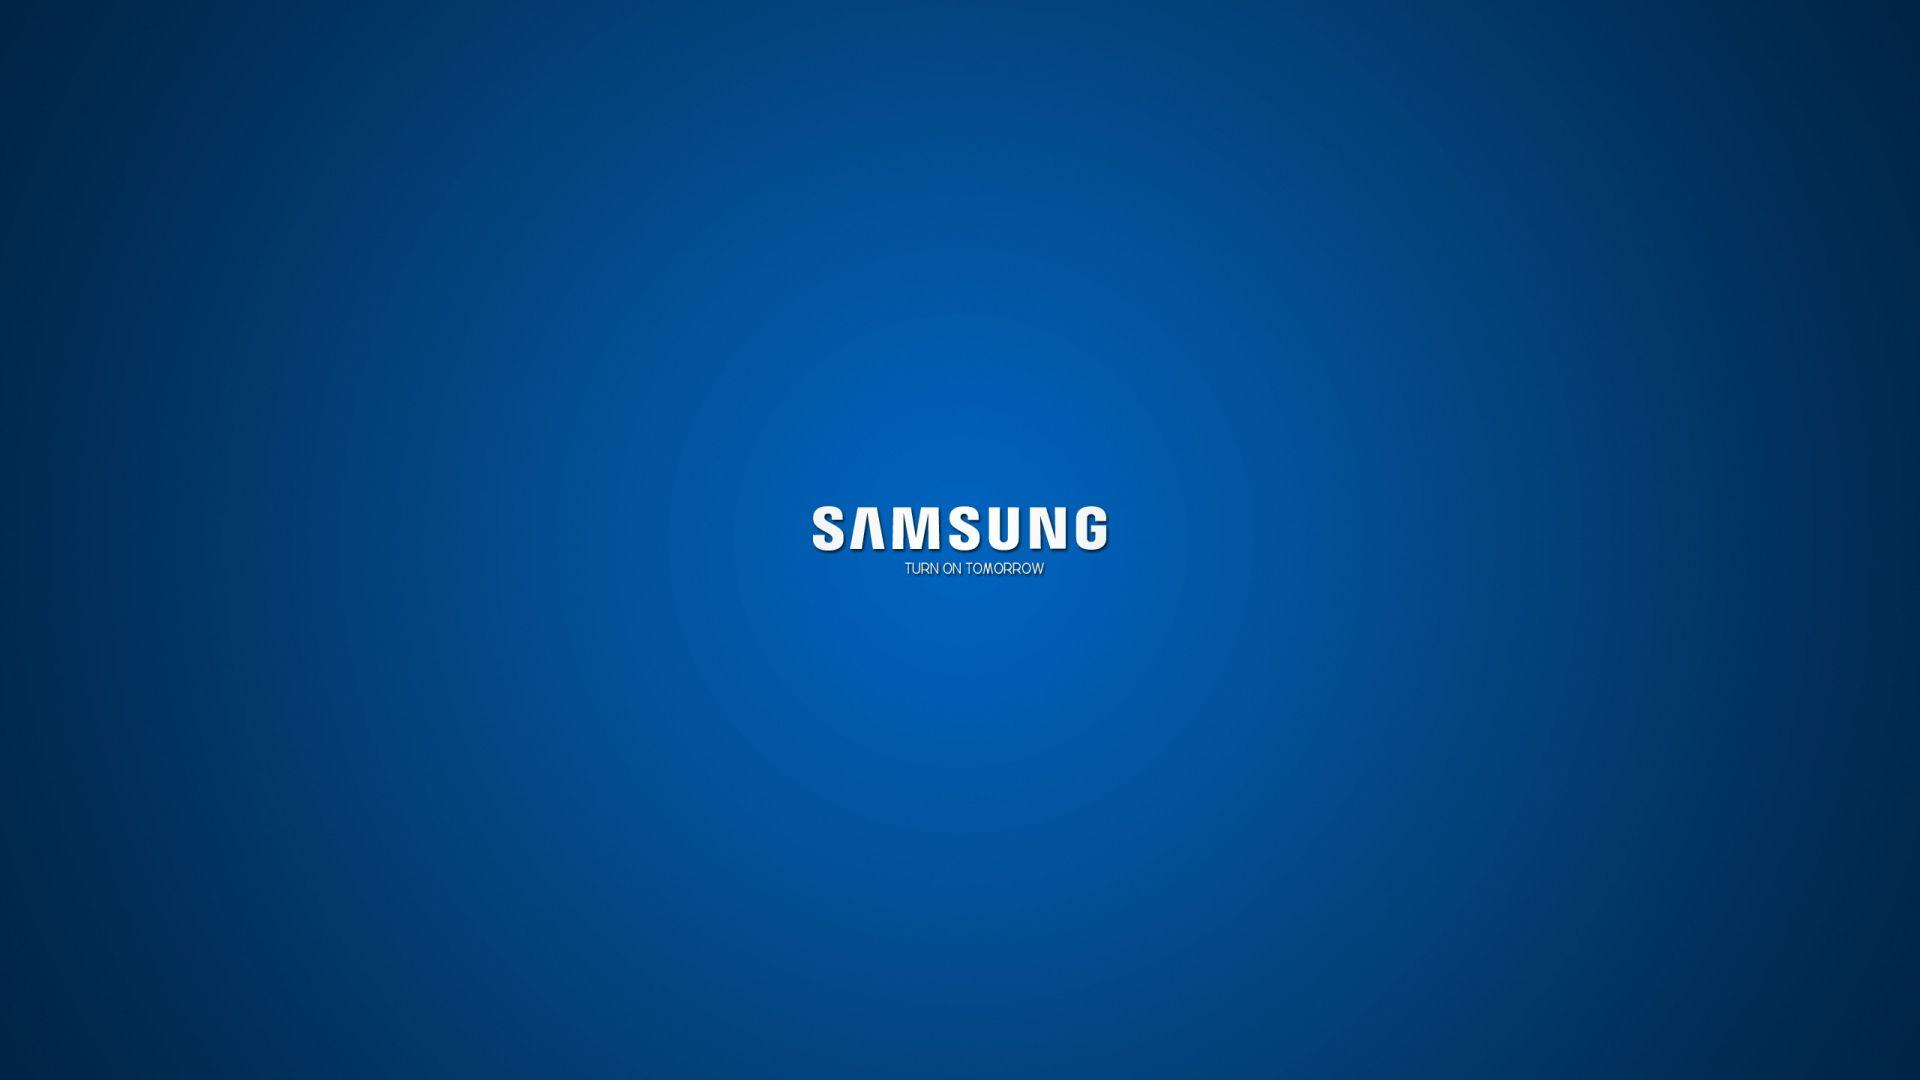 Samsung TV Wallpapers Free Samsung Backgrounds - WallpaperAccess